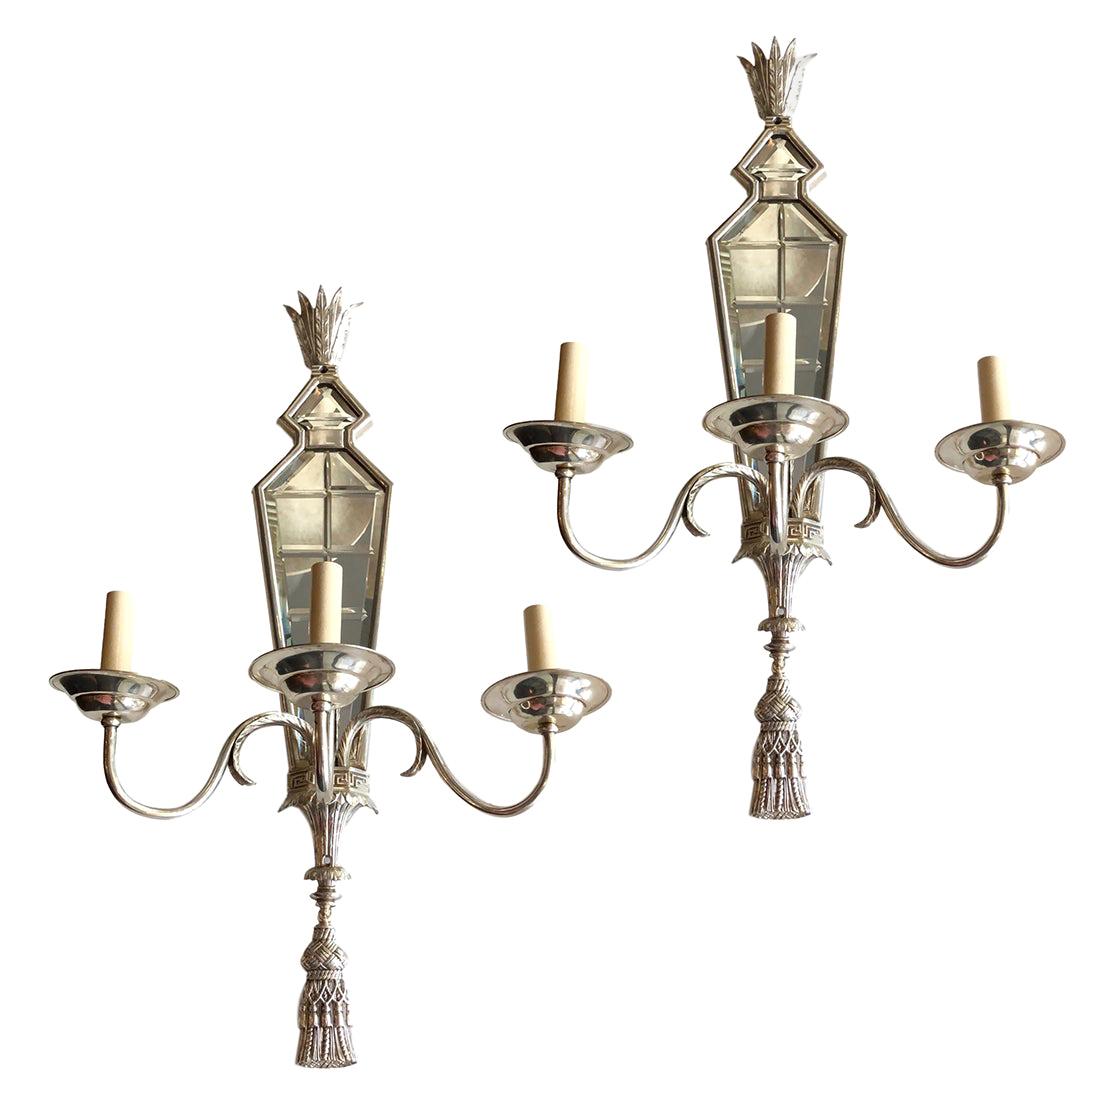 Set of Large Mirrored Sconces, Sold in Pairs